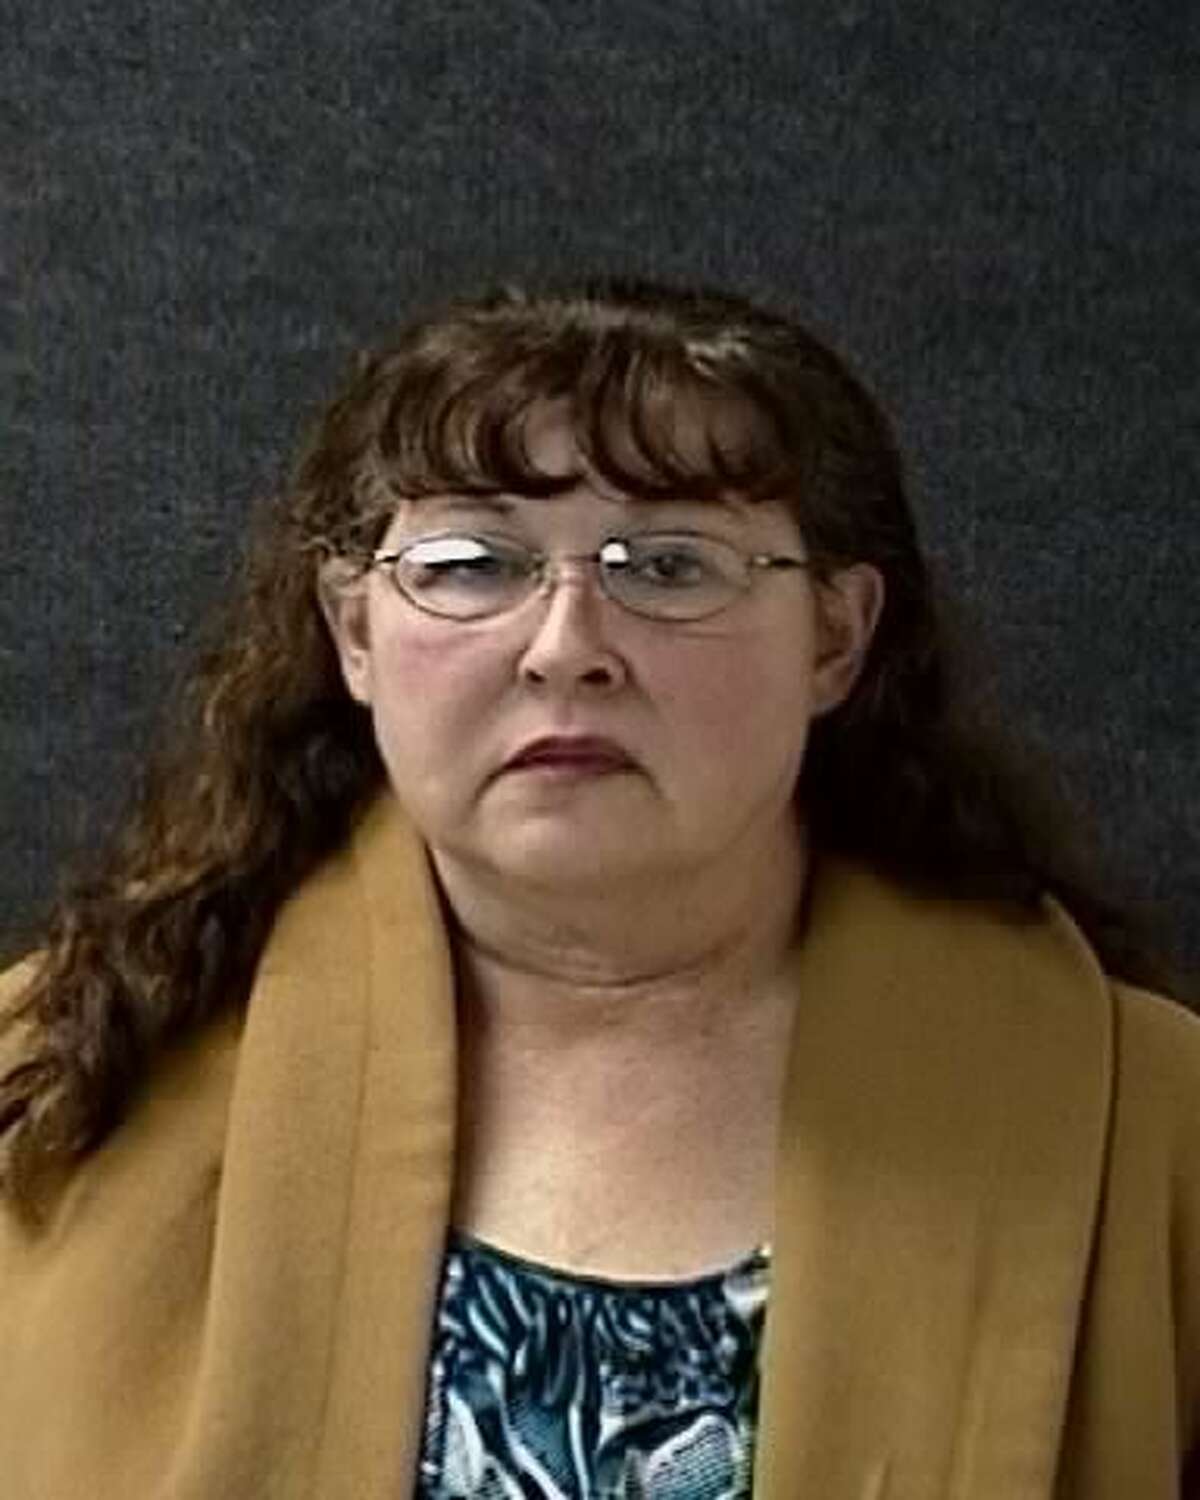 Theresa Green Mireles, a 57-year-old Corpus Christi woman, could see up to two years in prison for allegedly stealing a 14-karat gold necklace from the body of Kenneth Grimes during an open wake on Dec. 17 at the Charlie Marshal Funeral Home in Port Aransas. Grimes died Dec. 15 from complications from bone cancer. Mireles was arrested Dec. 31.